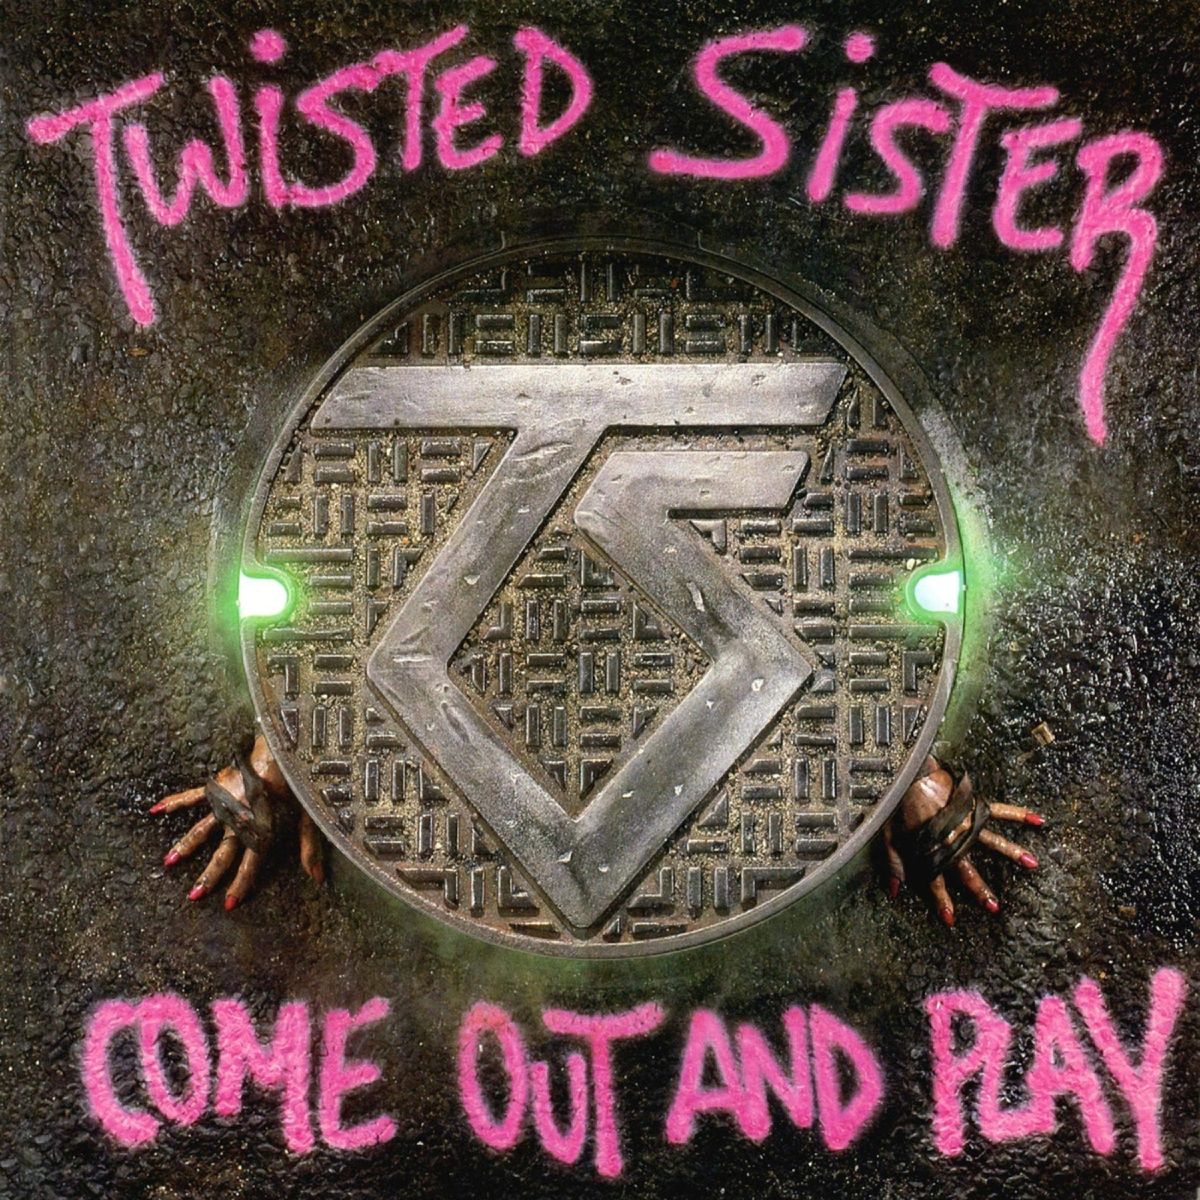 Обложка альбома «Come Out and Play» группы Twisted Sister